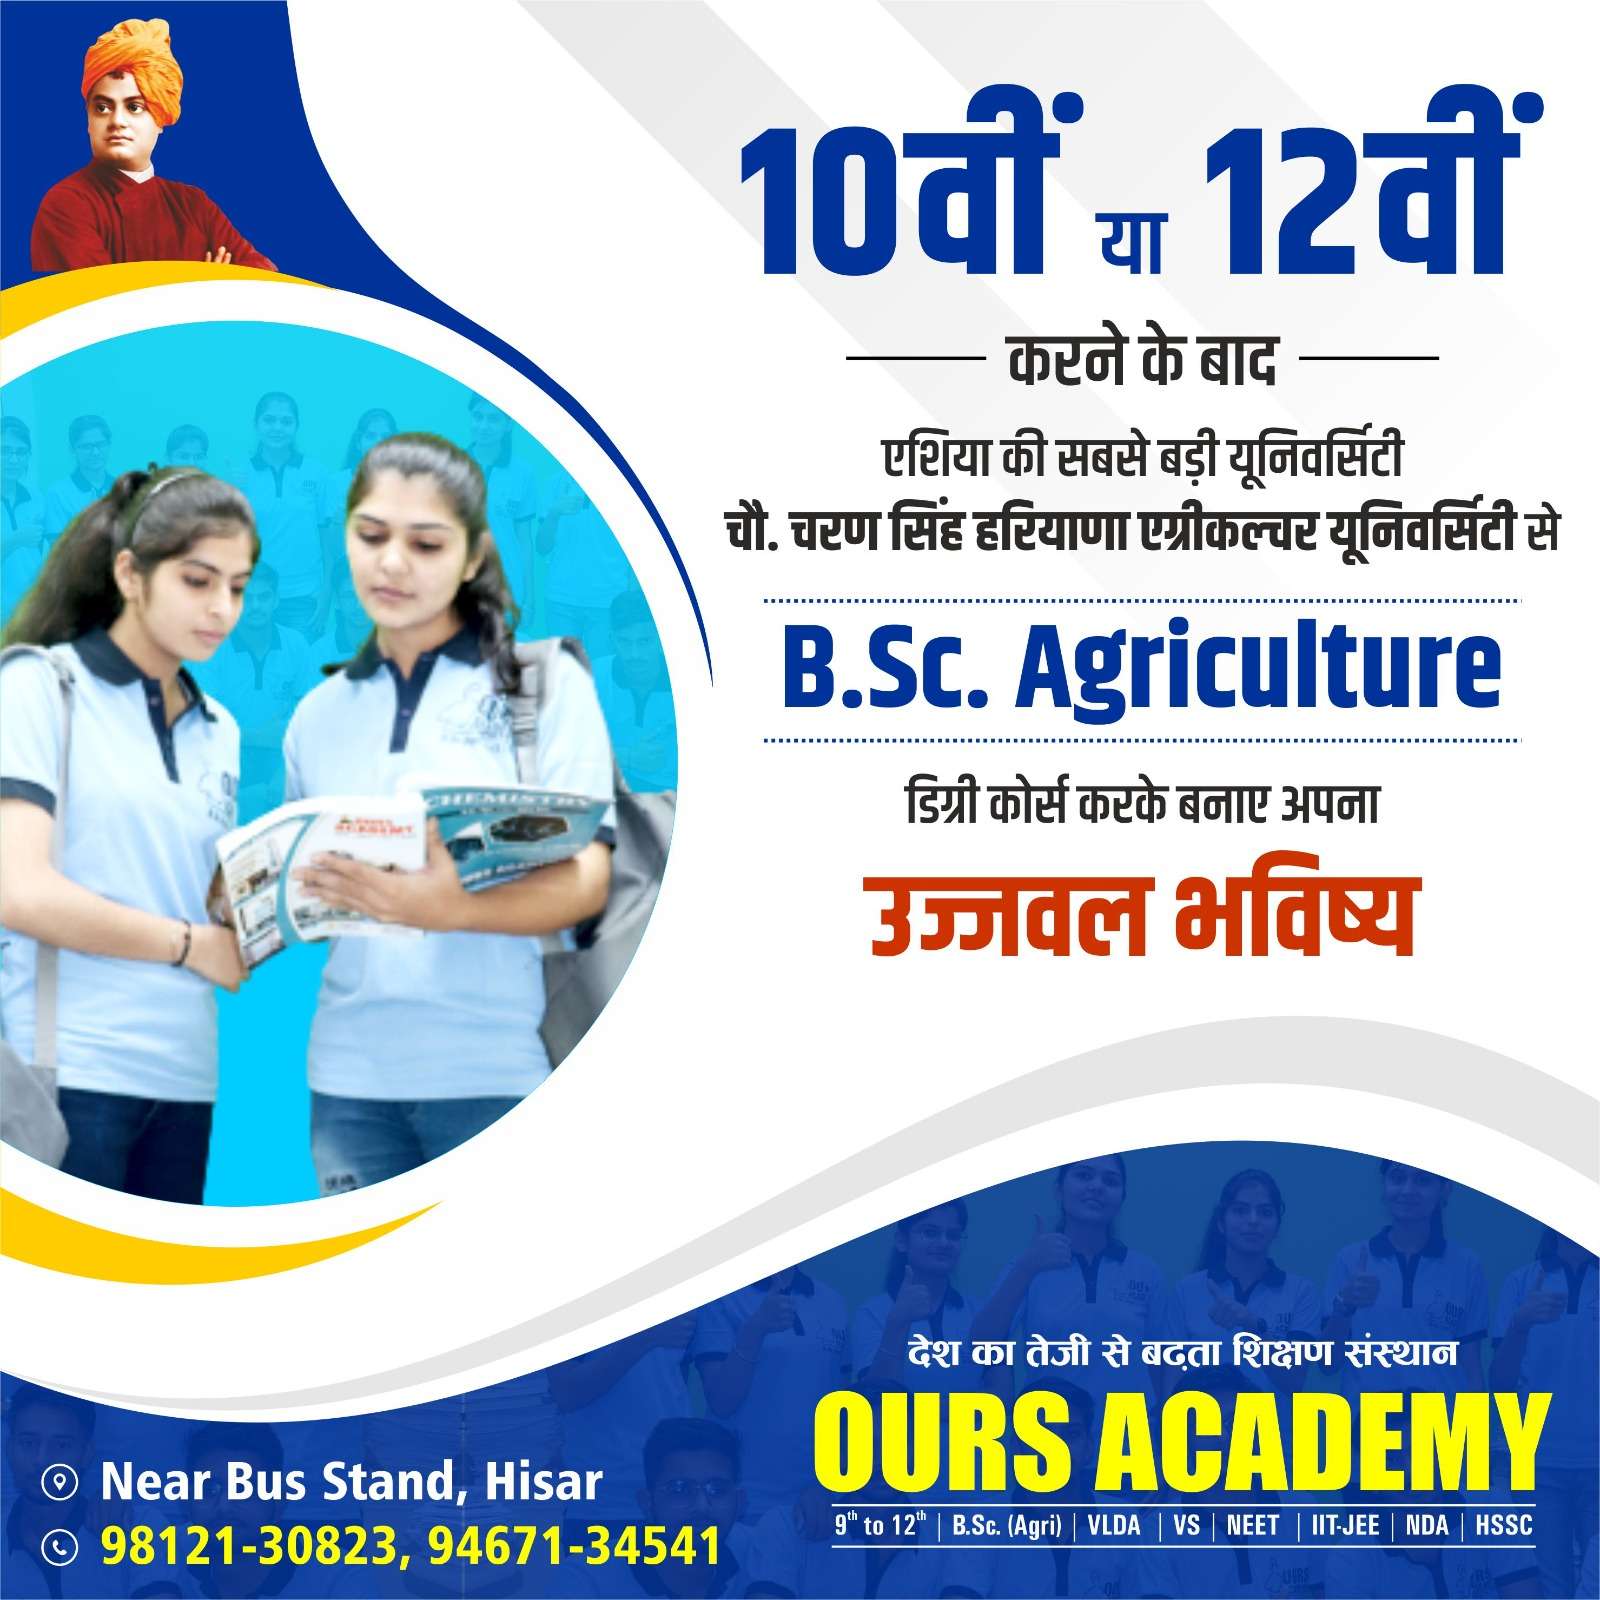 Our Academy: The Best Agriculture Academy in Hisar